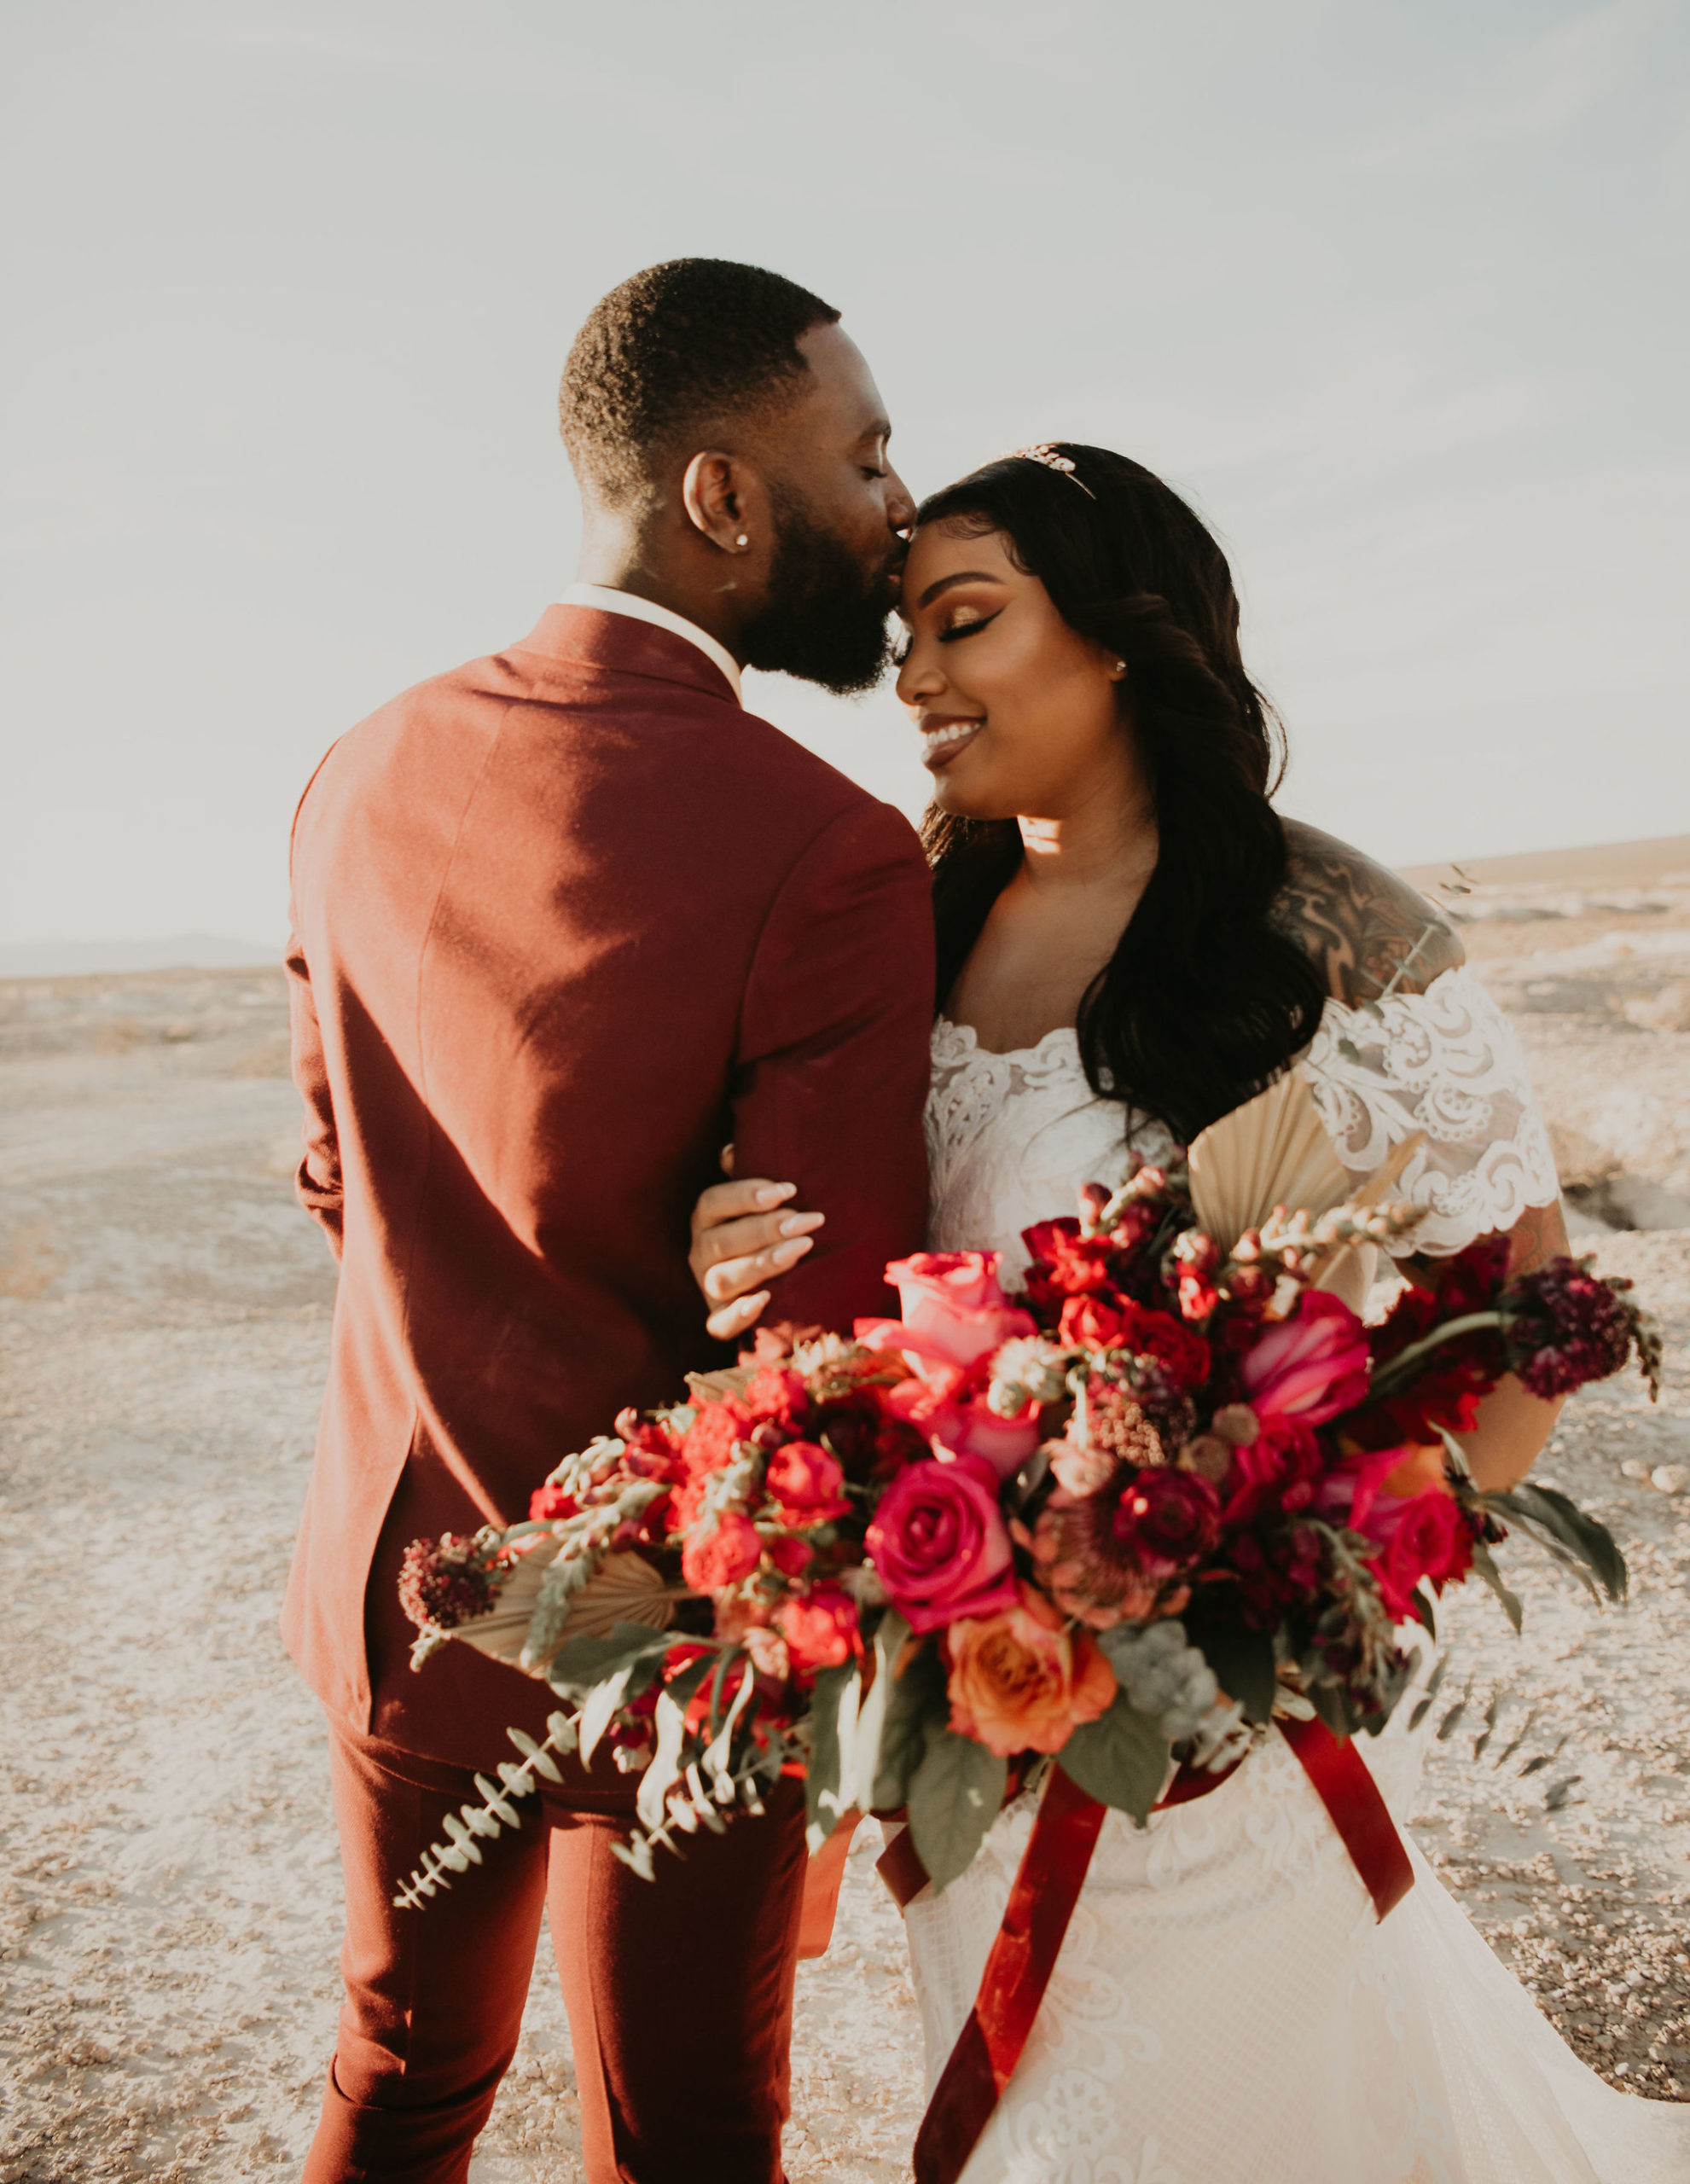 Groom Kissing Bride with Glam Make-up & Jewel Tone Bouquet in Desert 